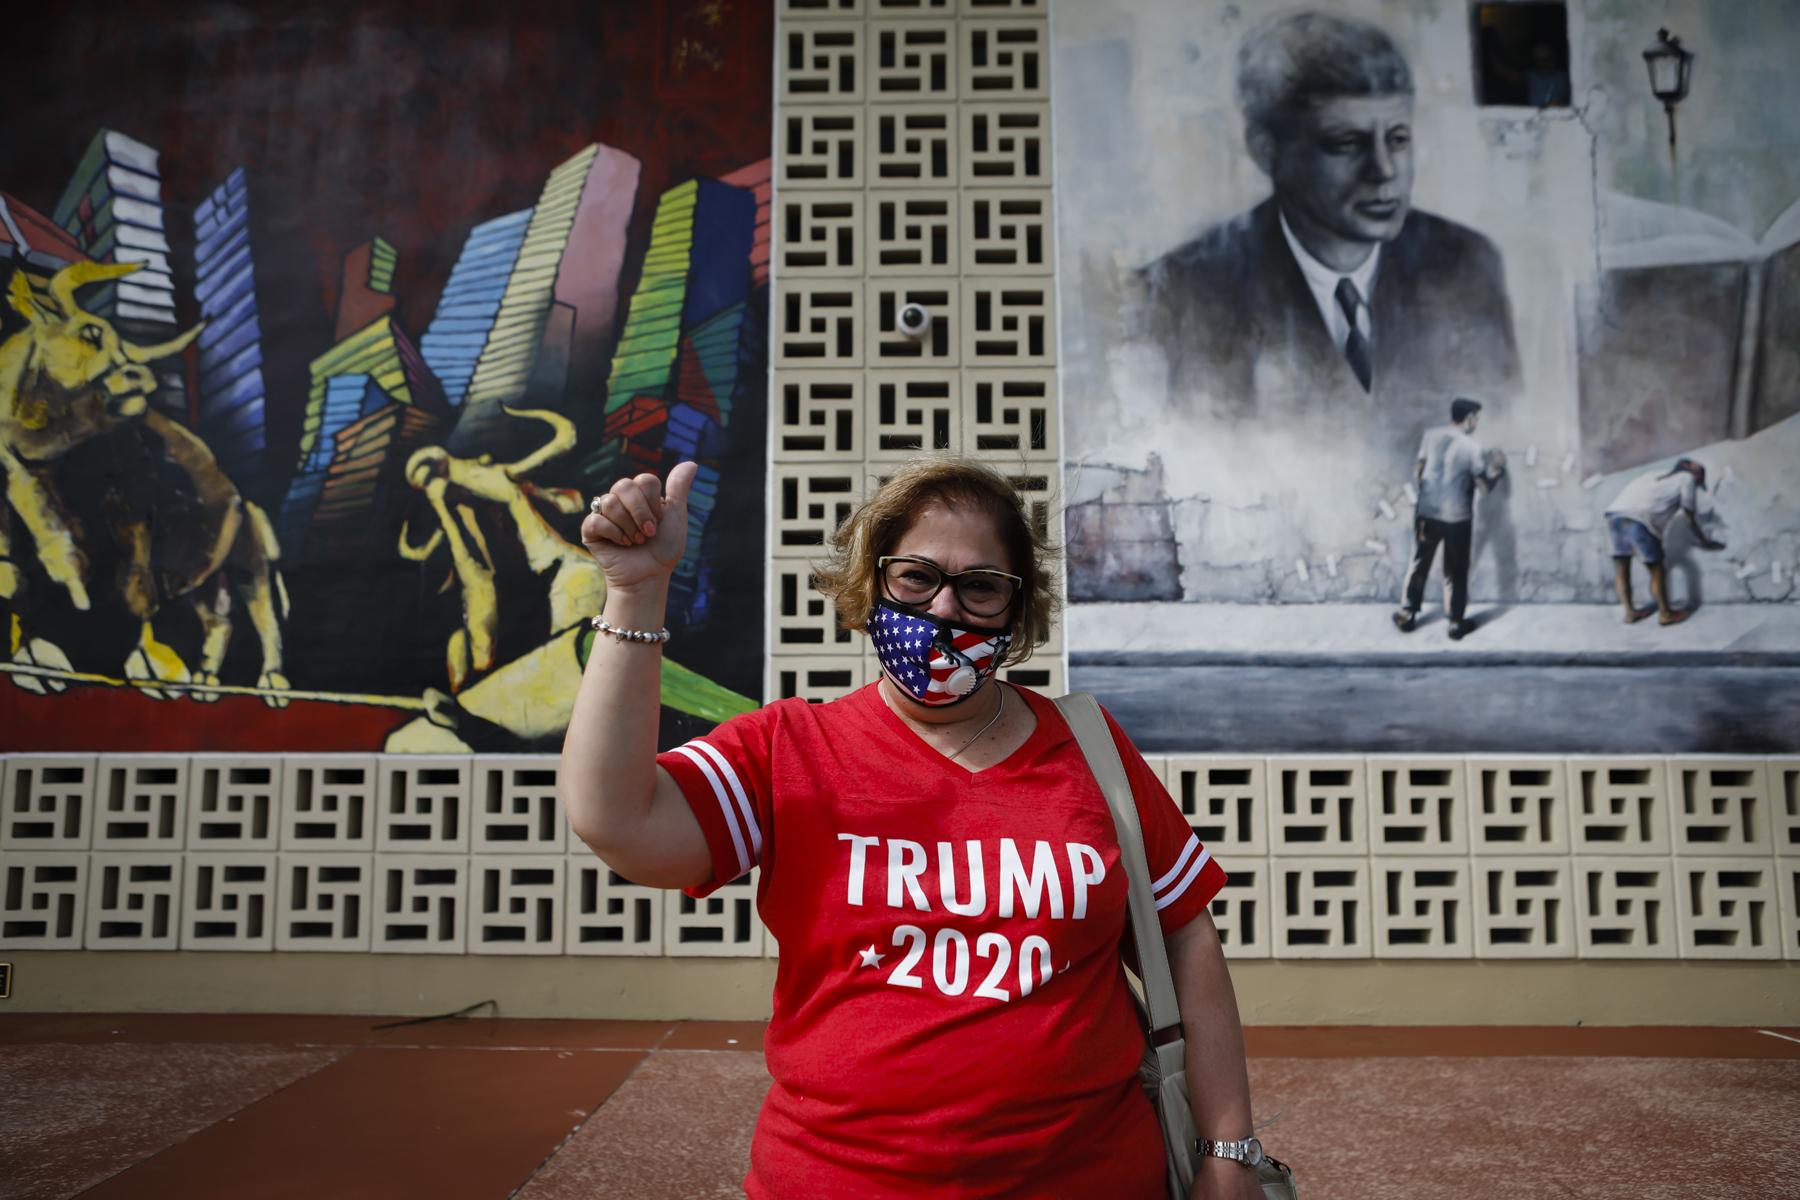 Election 2020 @ Miami, FL - A U.S. President Donald Trump supporter poses for a photo...